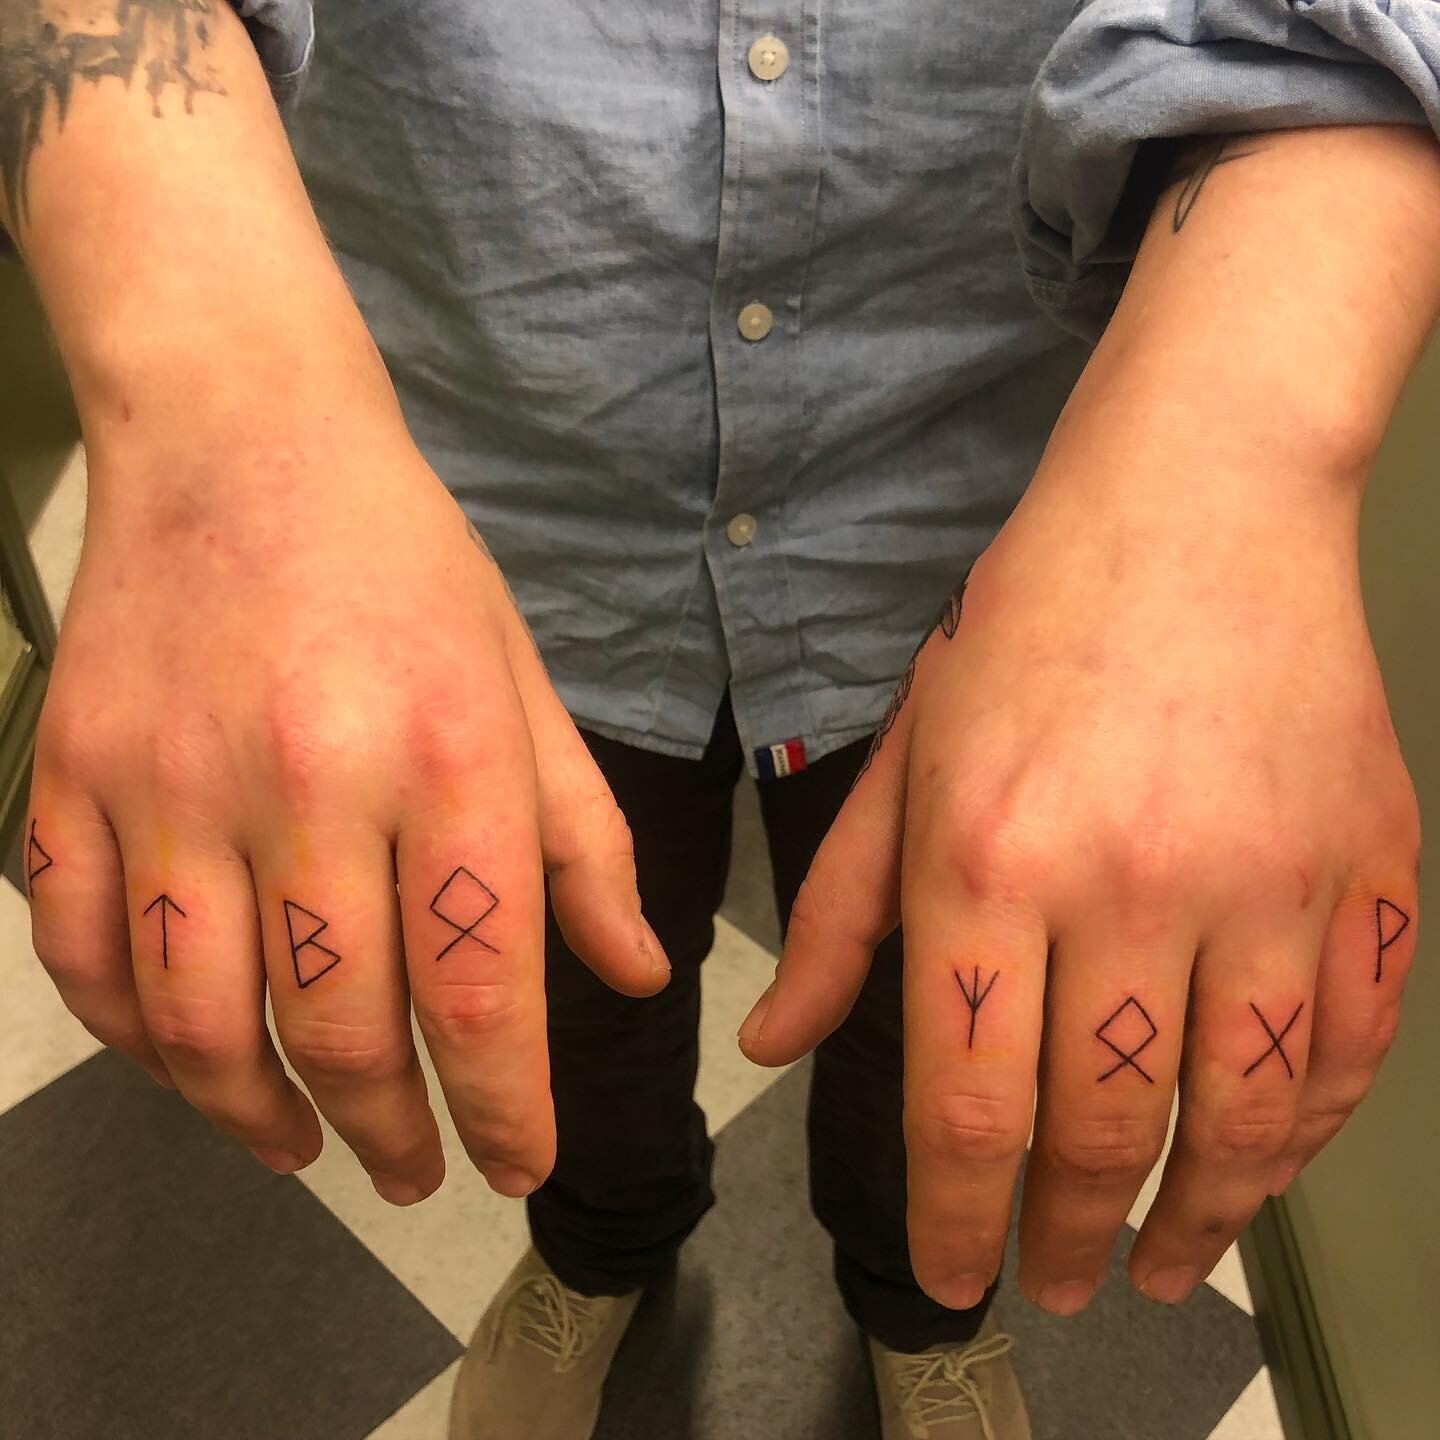 Some fingers from a while ago

#tattoo #tattoos #runes #fingertattoo